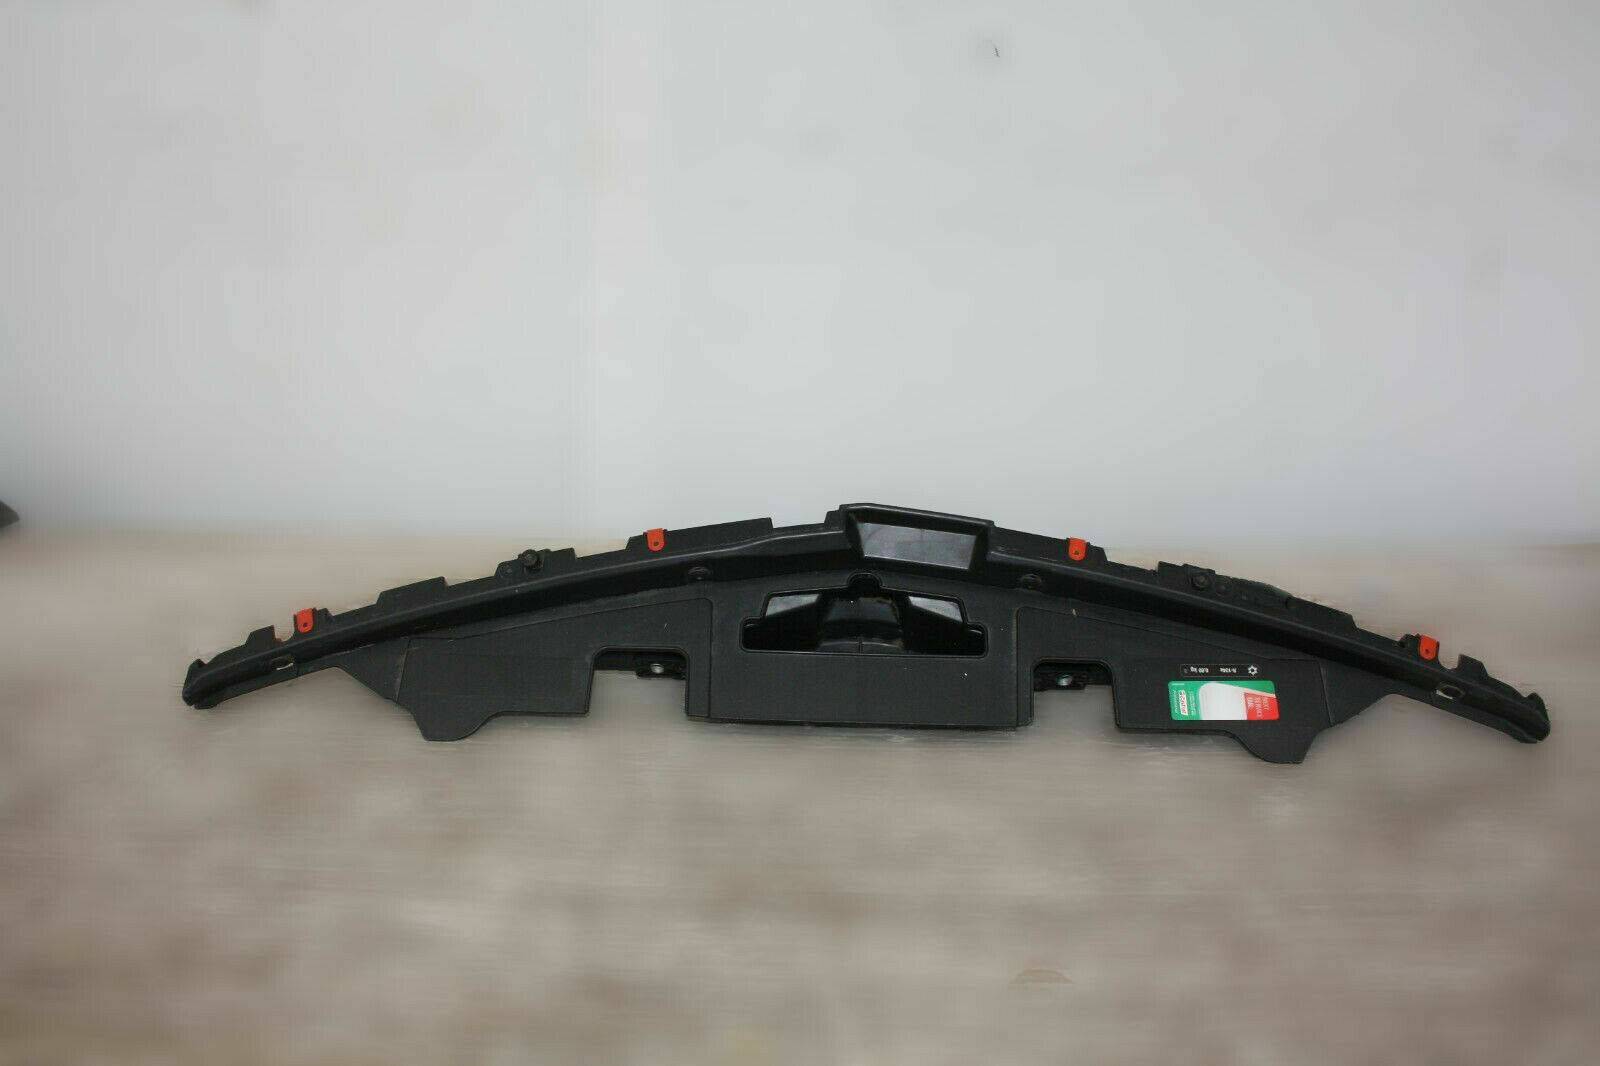 VAUXHALL-INSIGNIA-FRONT-BUMPER-UPPER-SLAM-PANEL-2009-TO-2013-175367529920-11